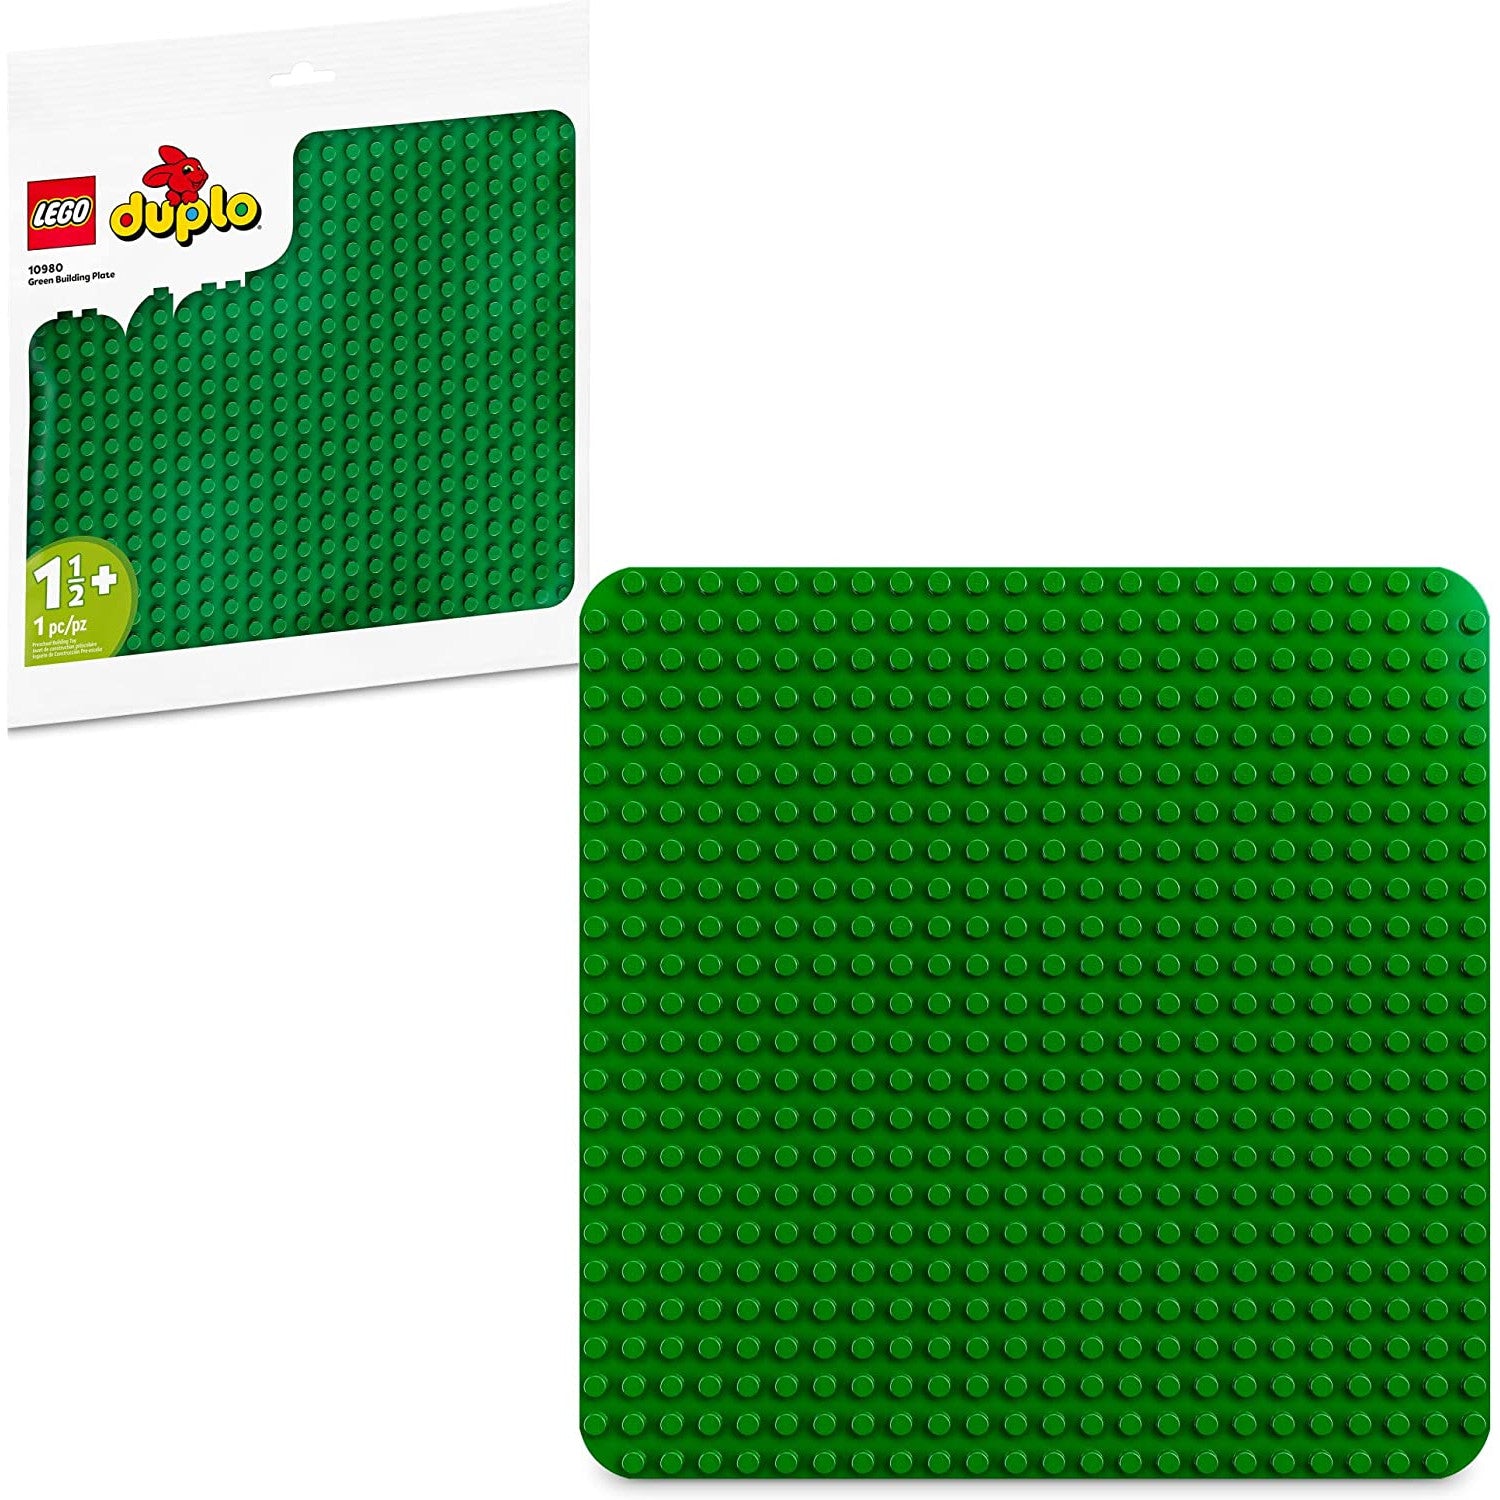 DUPLO by LEGO Green Building Plate 10980